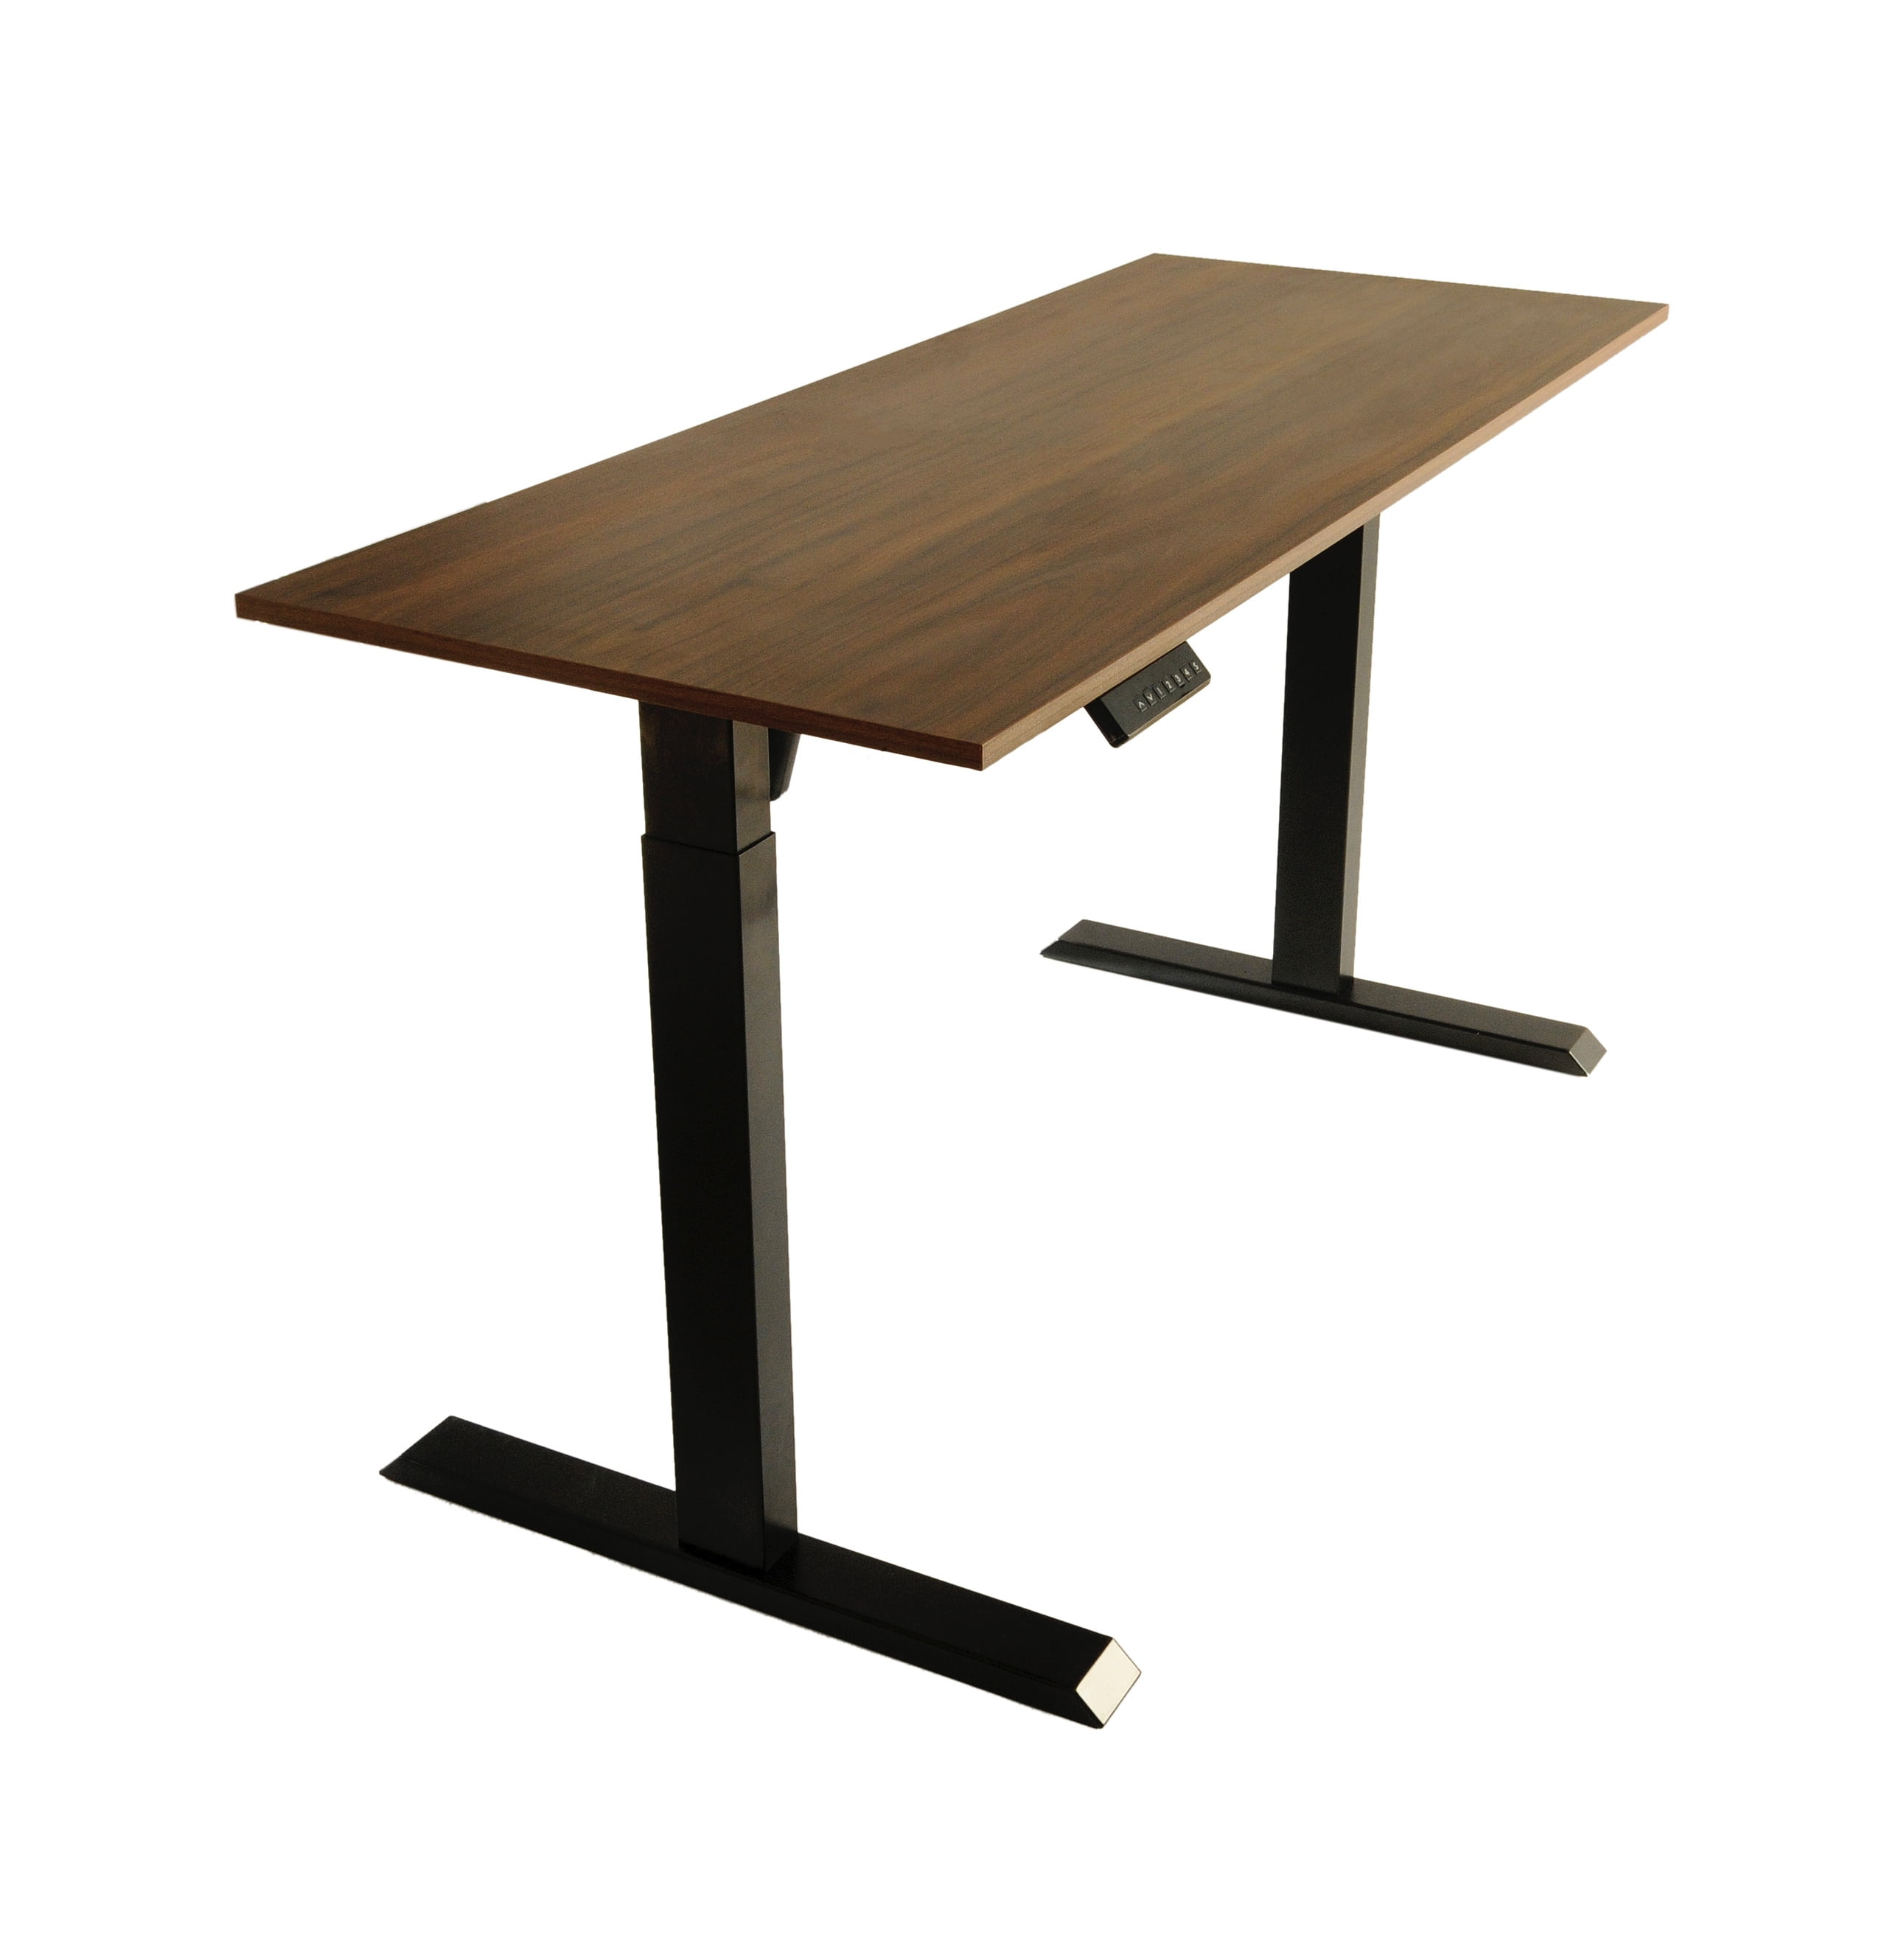 TechOrbits Electric Standing Desk Frame With 60 x 24 Inc Tabletop